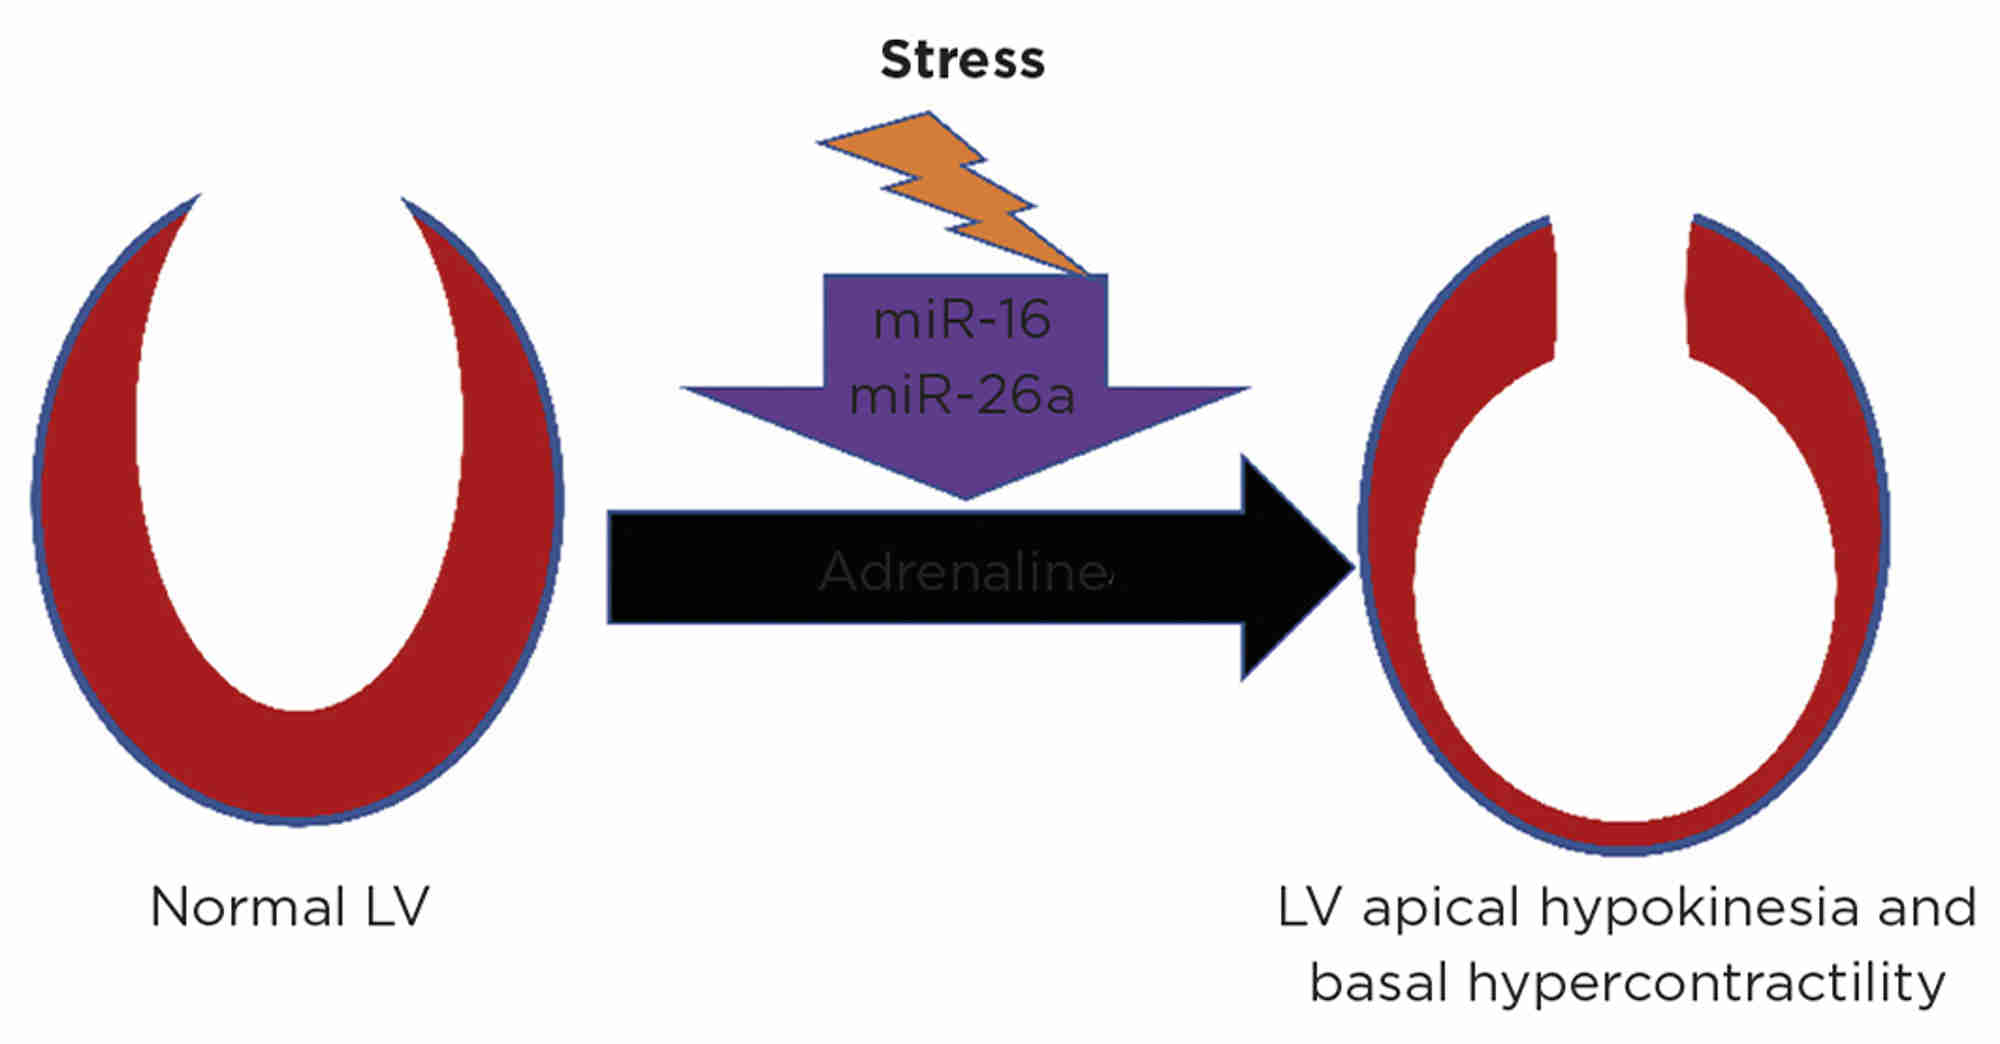 Figure. Prior stress may predispose to future TTS. Representation of the left ventricle (LV) showing TTS, with contractile dysfunction following adrenaline made more likely by prior neuropsychiatric stress. Reproduced under CC BY 4.0 Licence (http://creativecommons.org/licenses/by/4.0) from Couch et al.10 https://doi.org/10.1093/cvr/cvab210 &#169;2021 The Authors